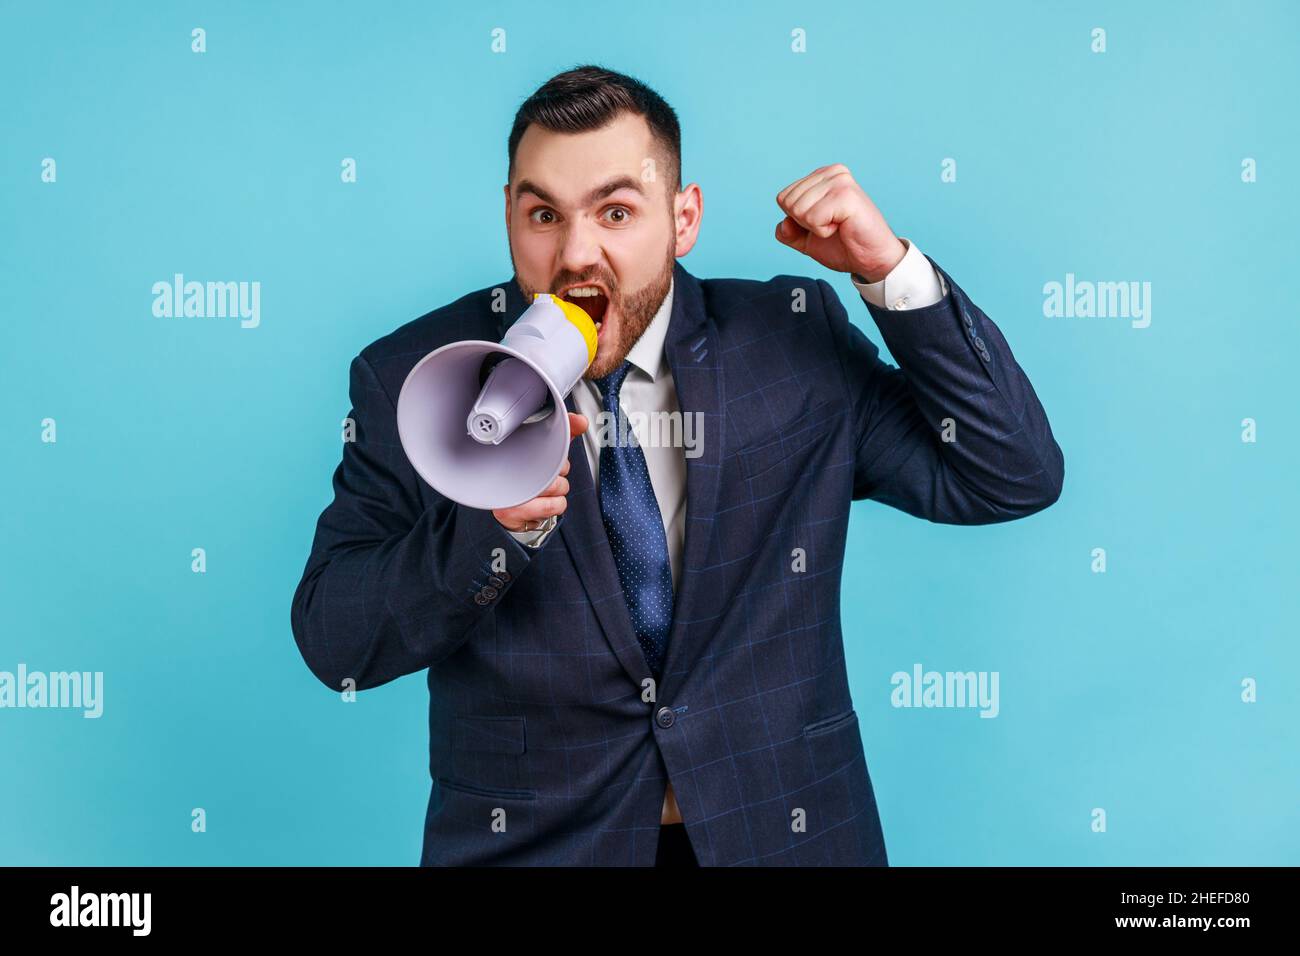 Angry serious businessman wearing dark official style suit loudly speaking screaming holding megaphone, announcing important message. Indoor studio shot isolated on blue background. Stock Photo